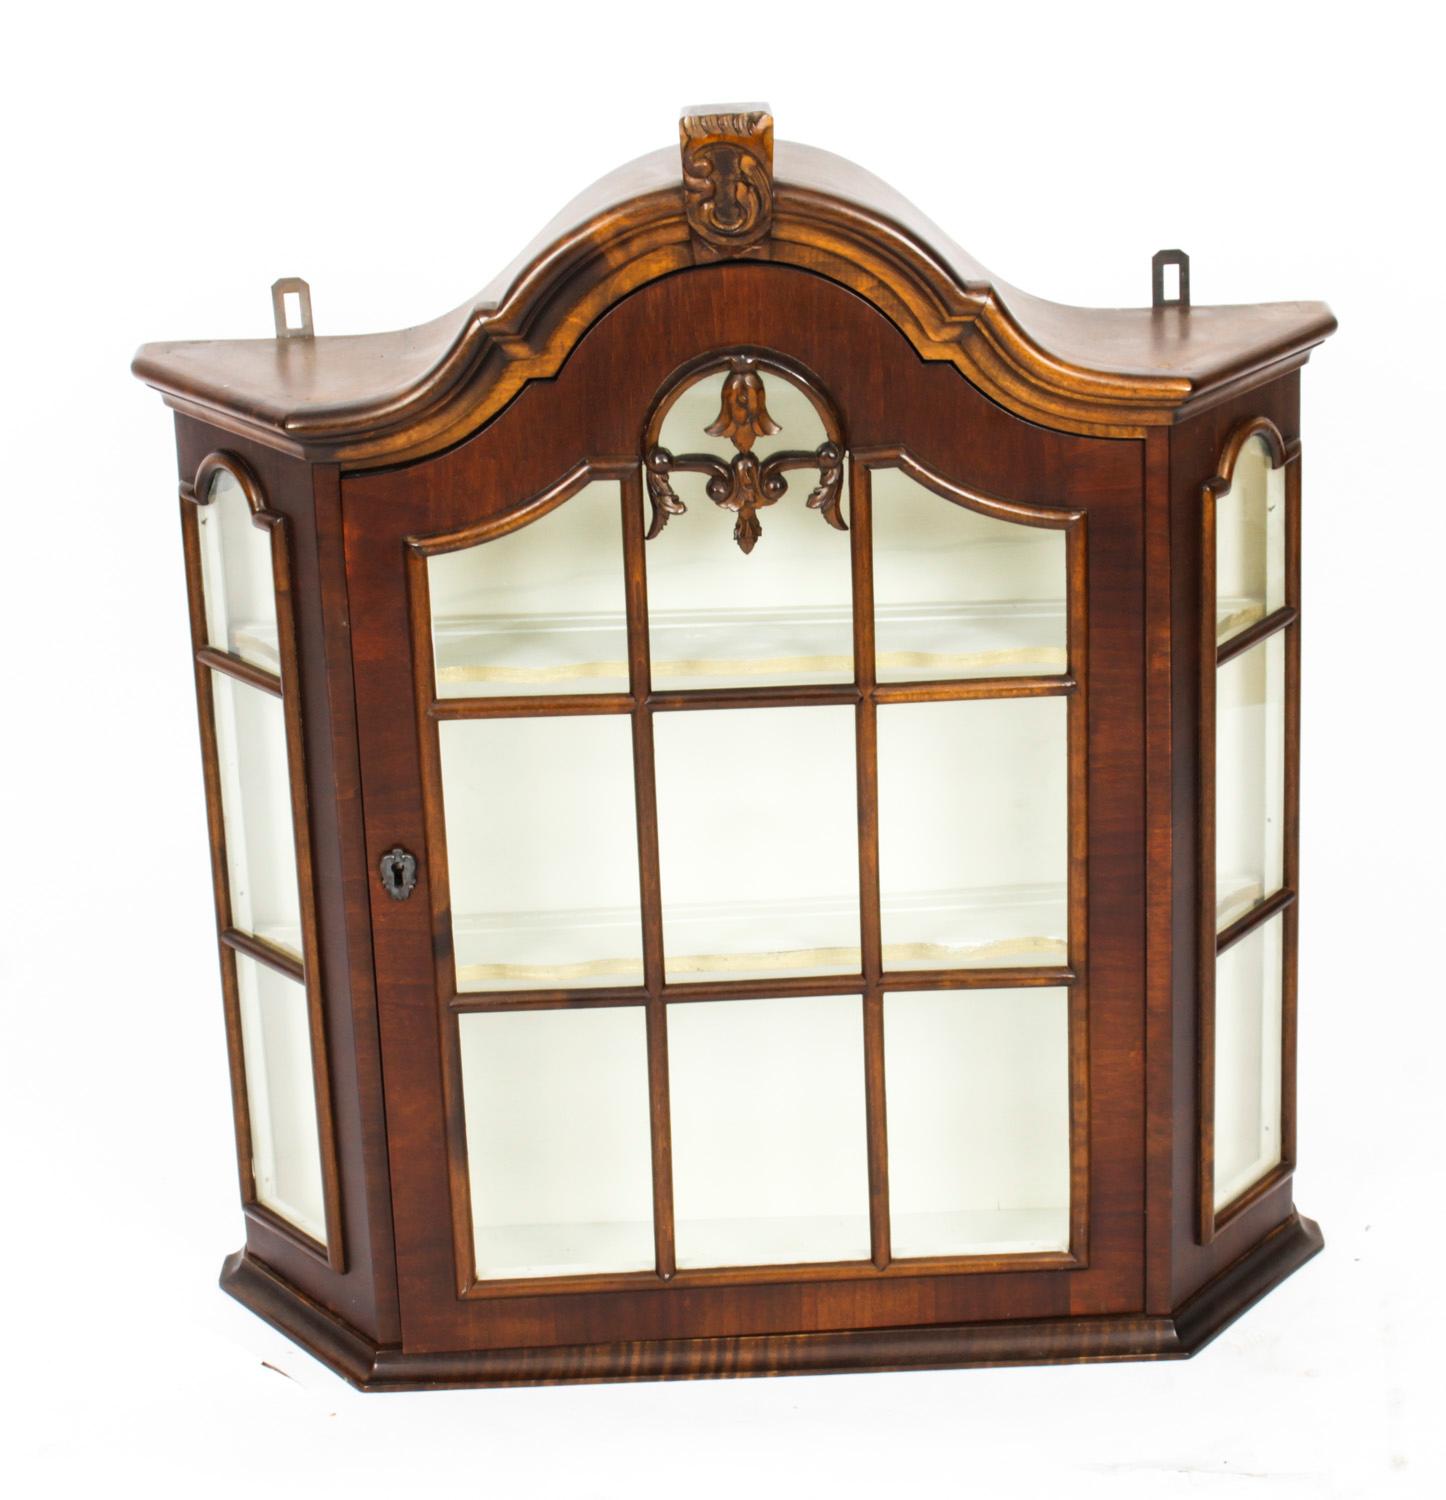 This is an antique Dutch walnut wall hanging cabinet, circa 1840 in date.

The cabinet has canted corners, an arched astragal glazed door and two shelves to display your collectables. the top is surmounted with an acanthus scroll crfesting.

It